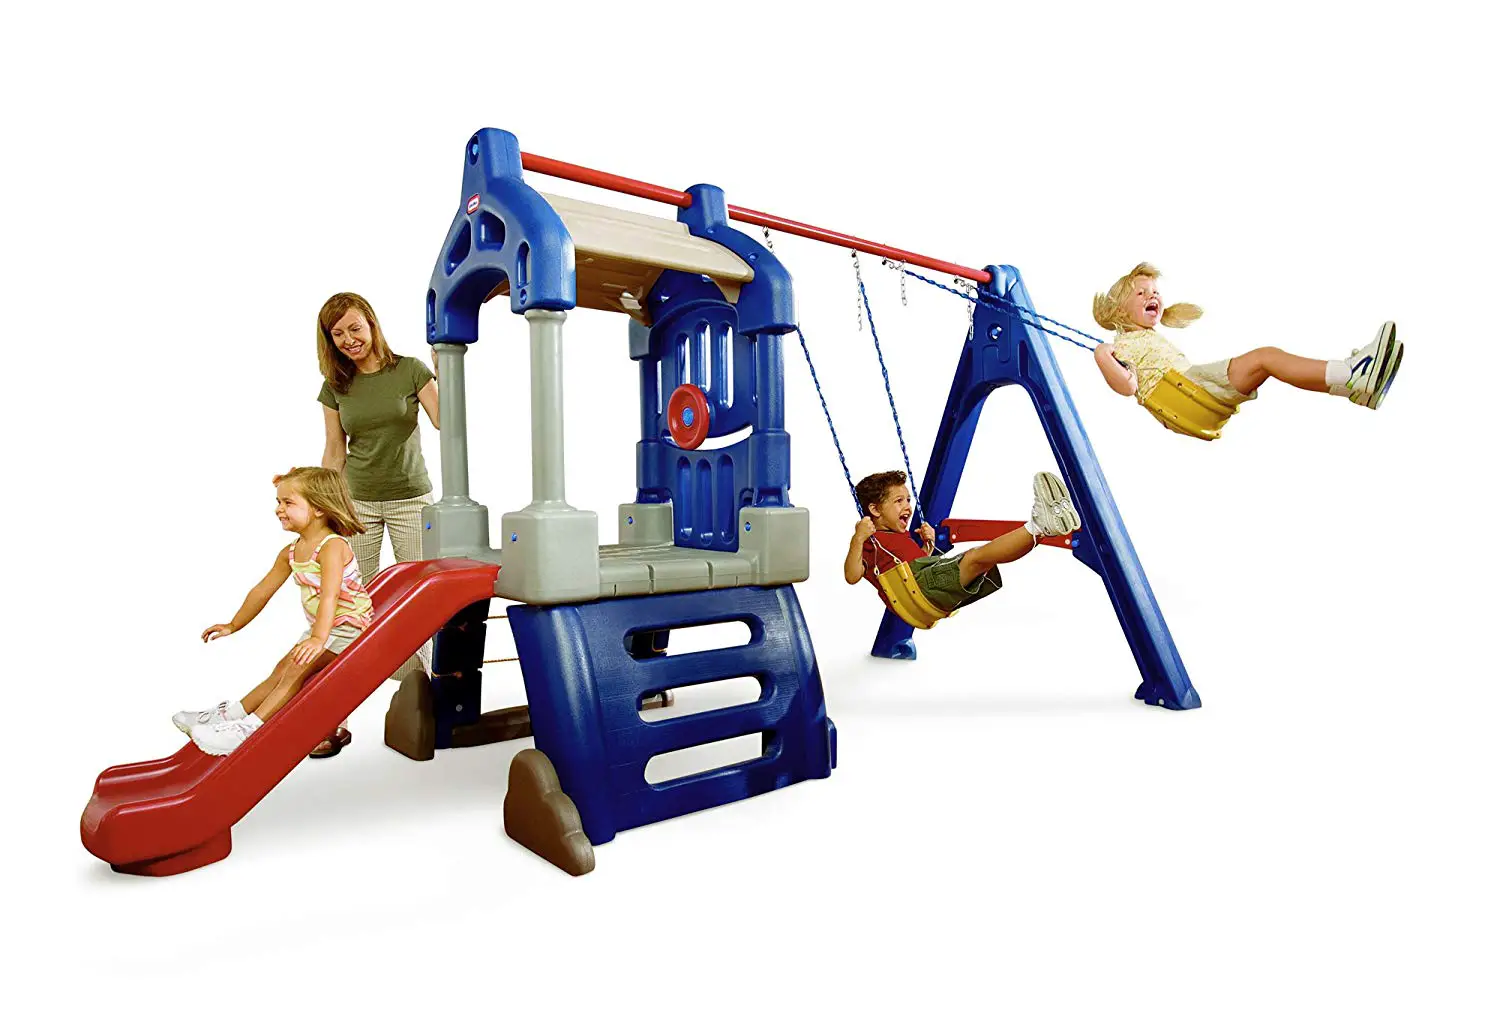 The Little Tikes Clubhouse Swing Set